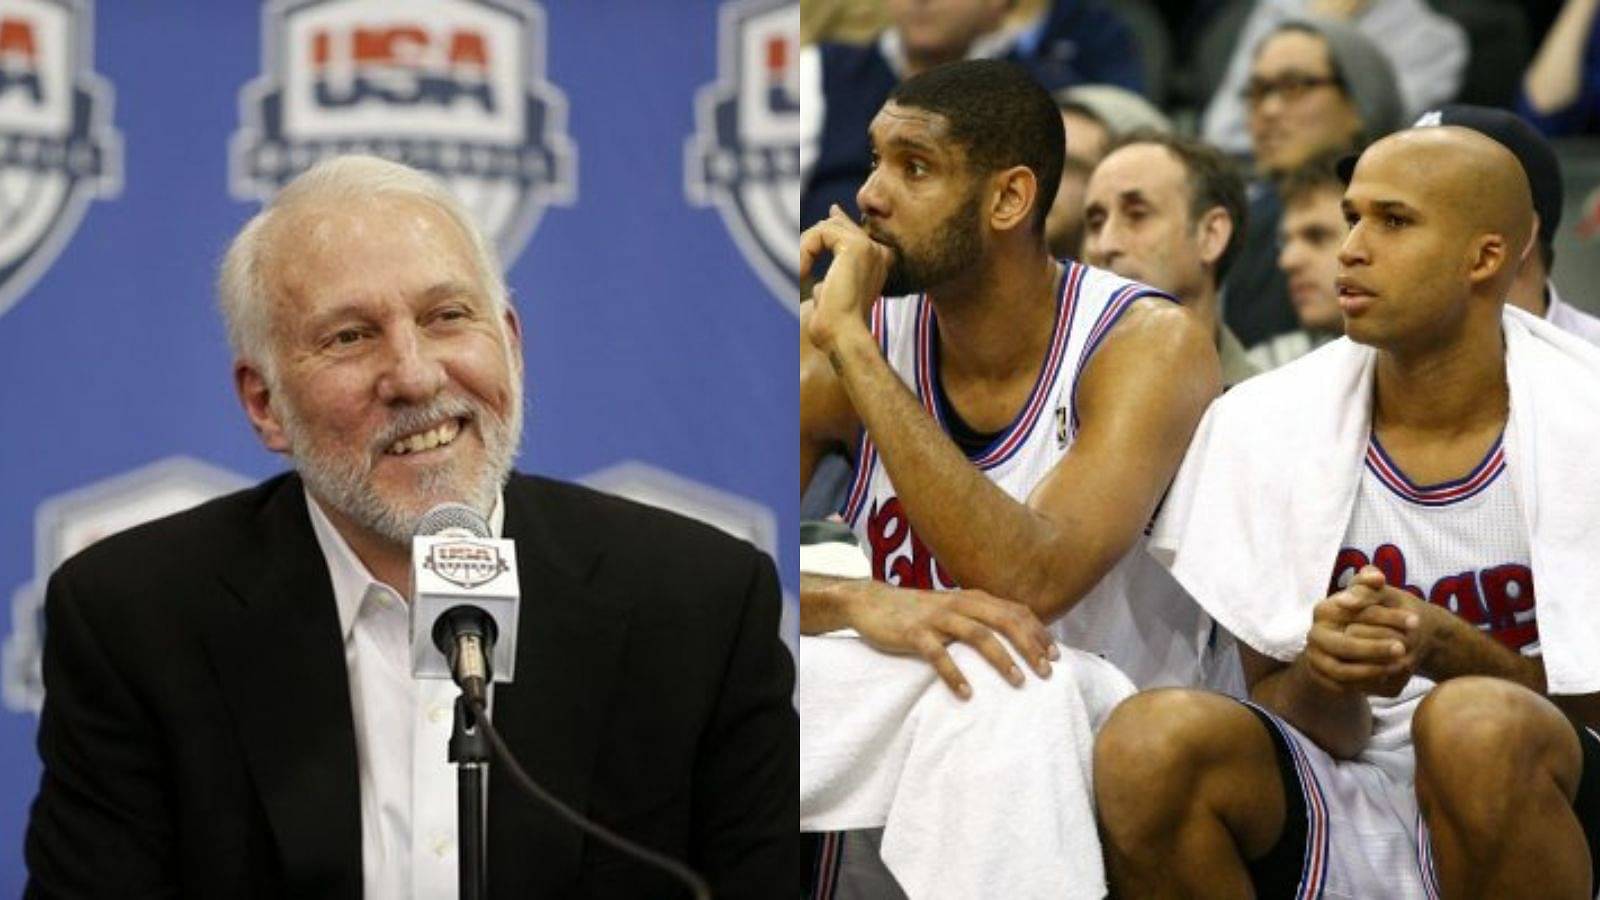 “Gregg Popovic liked Donald Trump over Richard Jefferson": Tim Duncan hilariously opened up about Coach Pop and RJ's relationship